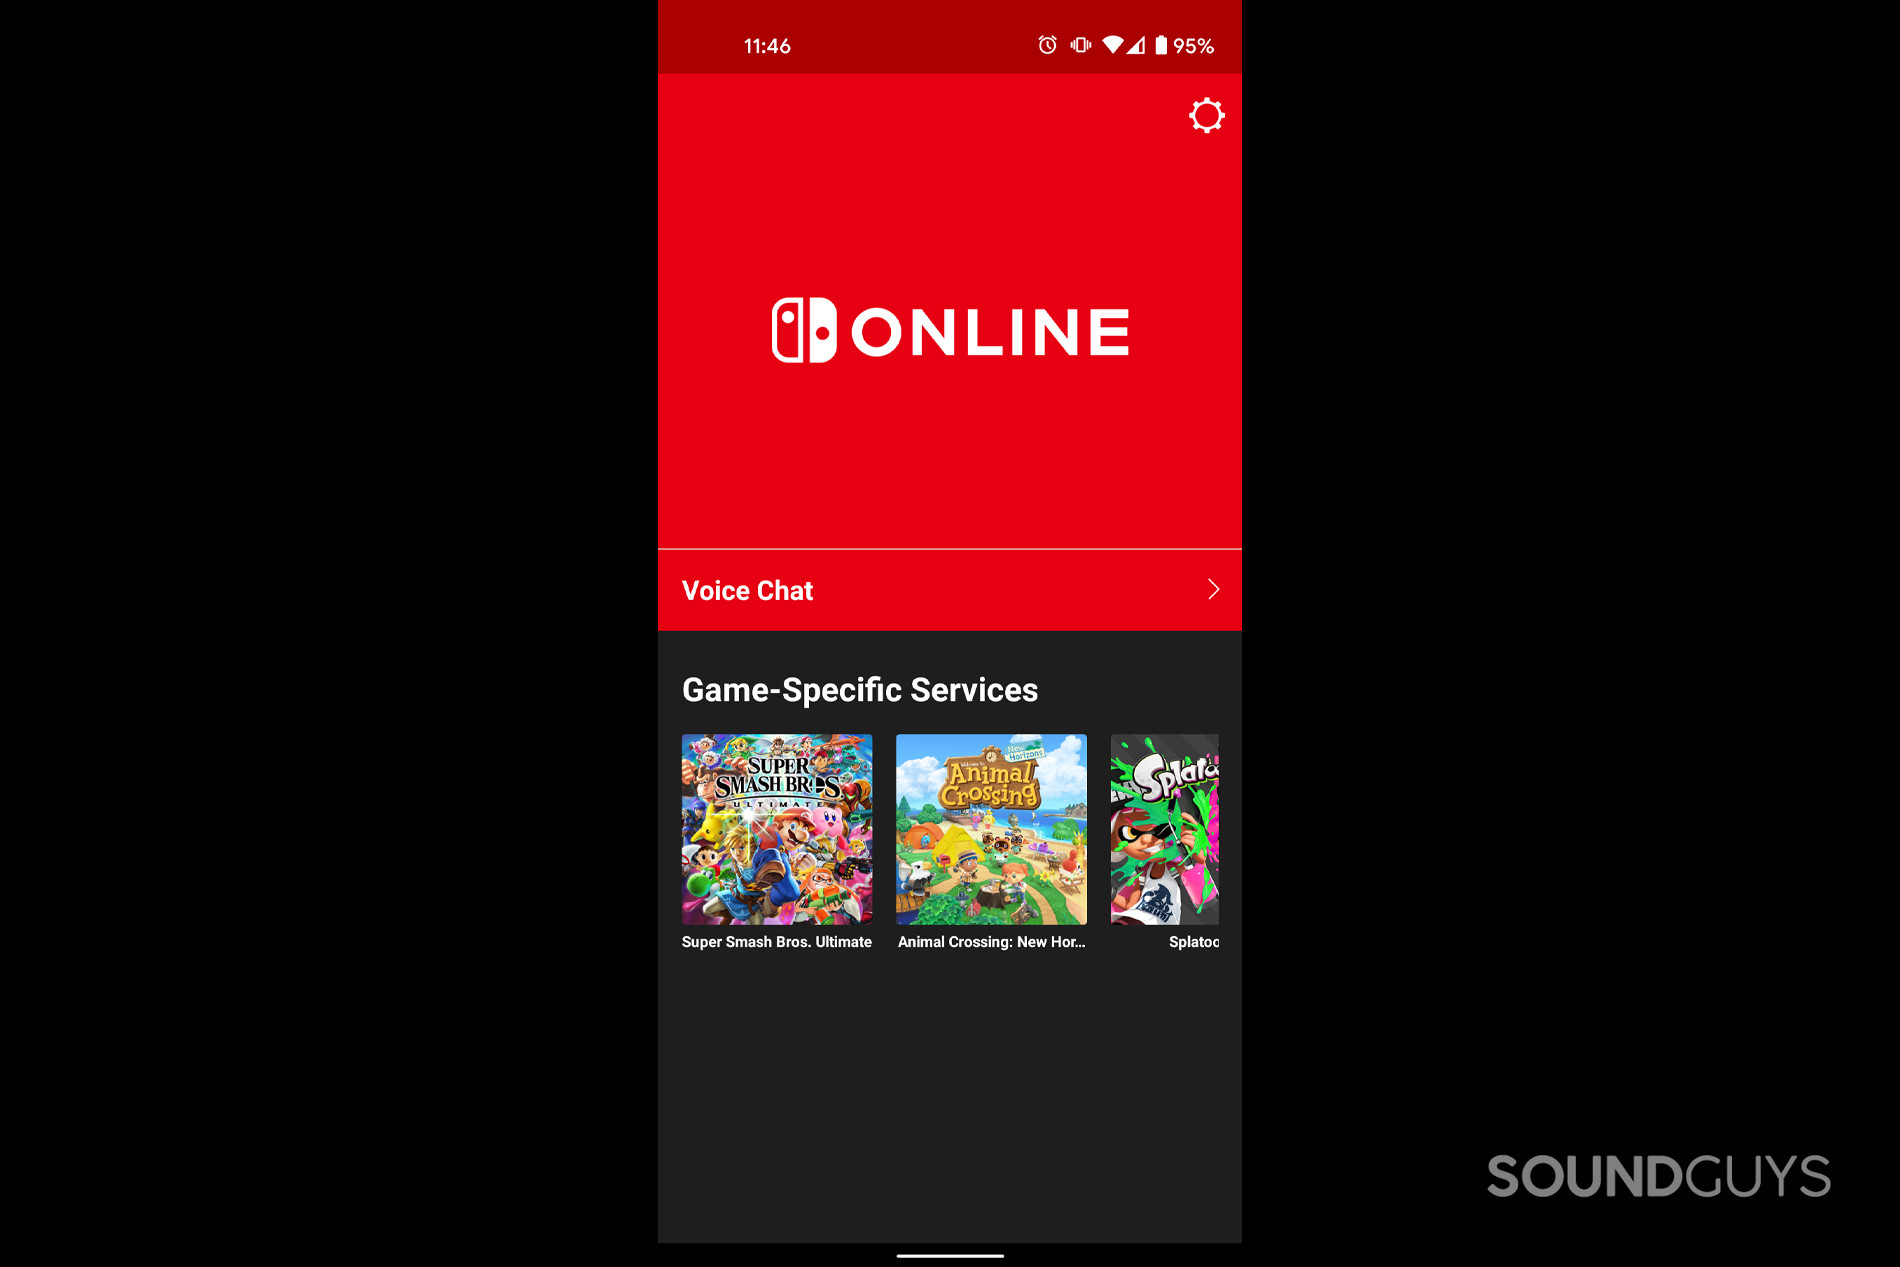 A screenshot of the Nintendo Switch Online app, with options displayed for Super Smash Bros. Ultimate, Animal Crossing New Horizons, and Splatoon 2.